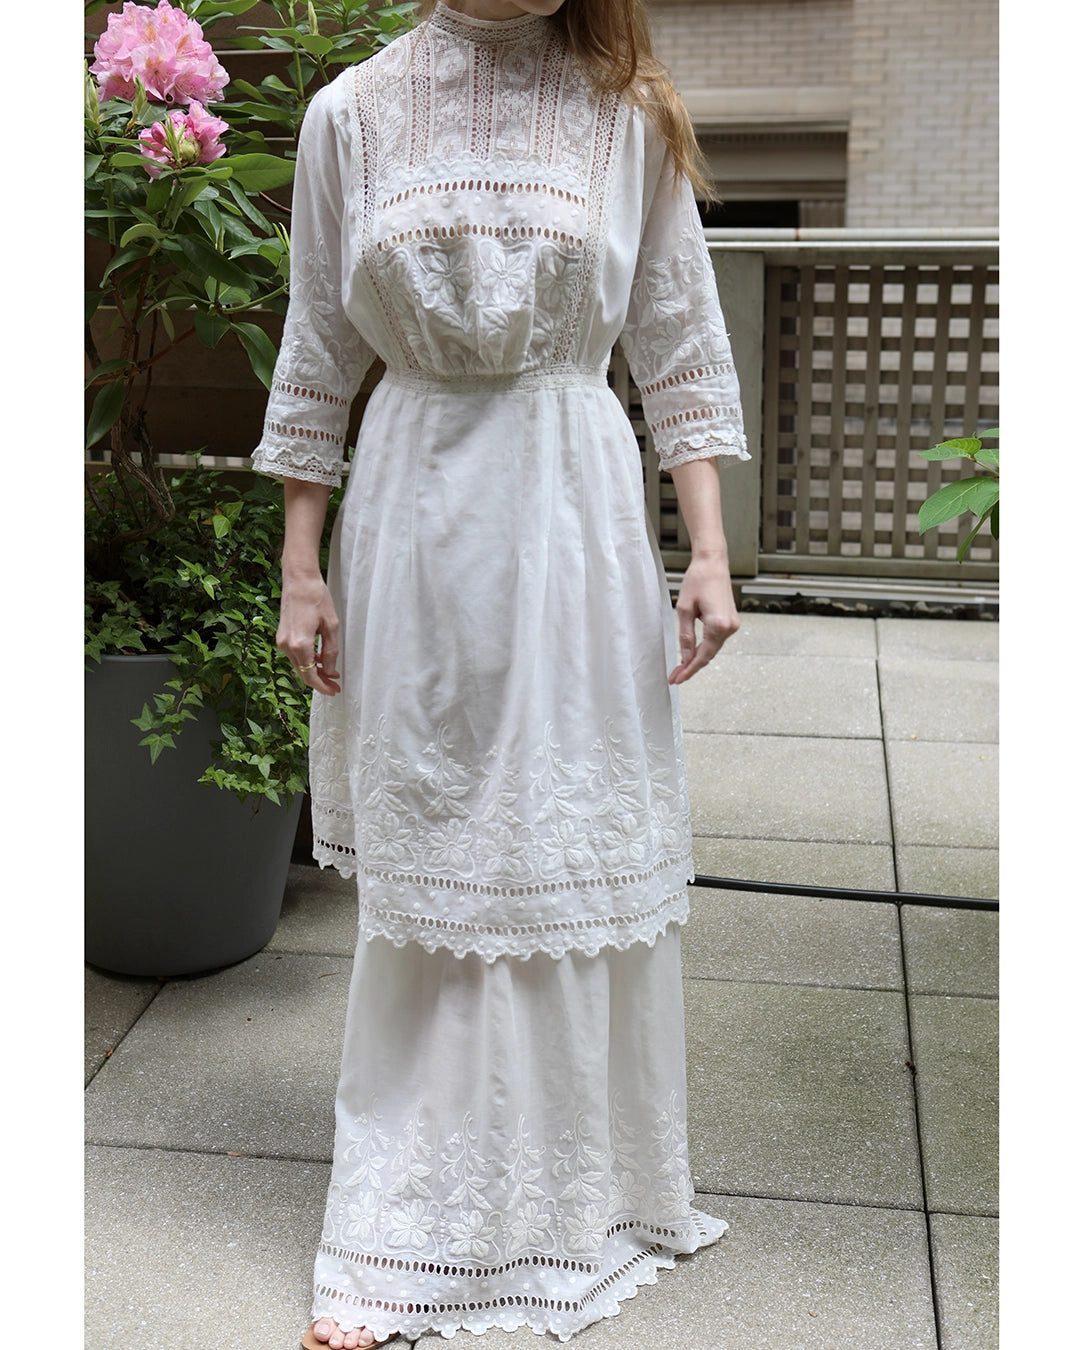 Antique Edwardian Ivory Embroidered Lace Lawn Dress With Underskirt